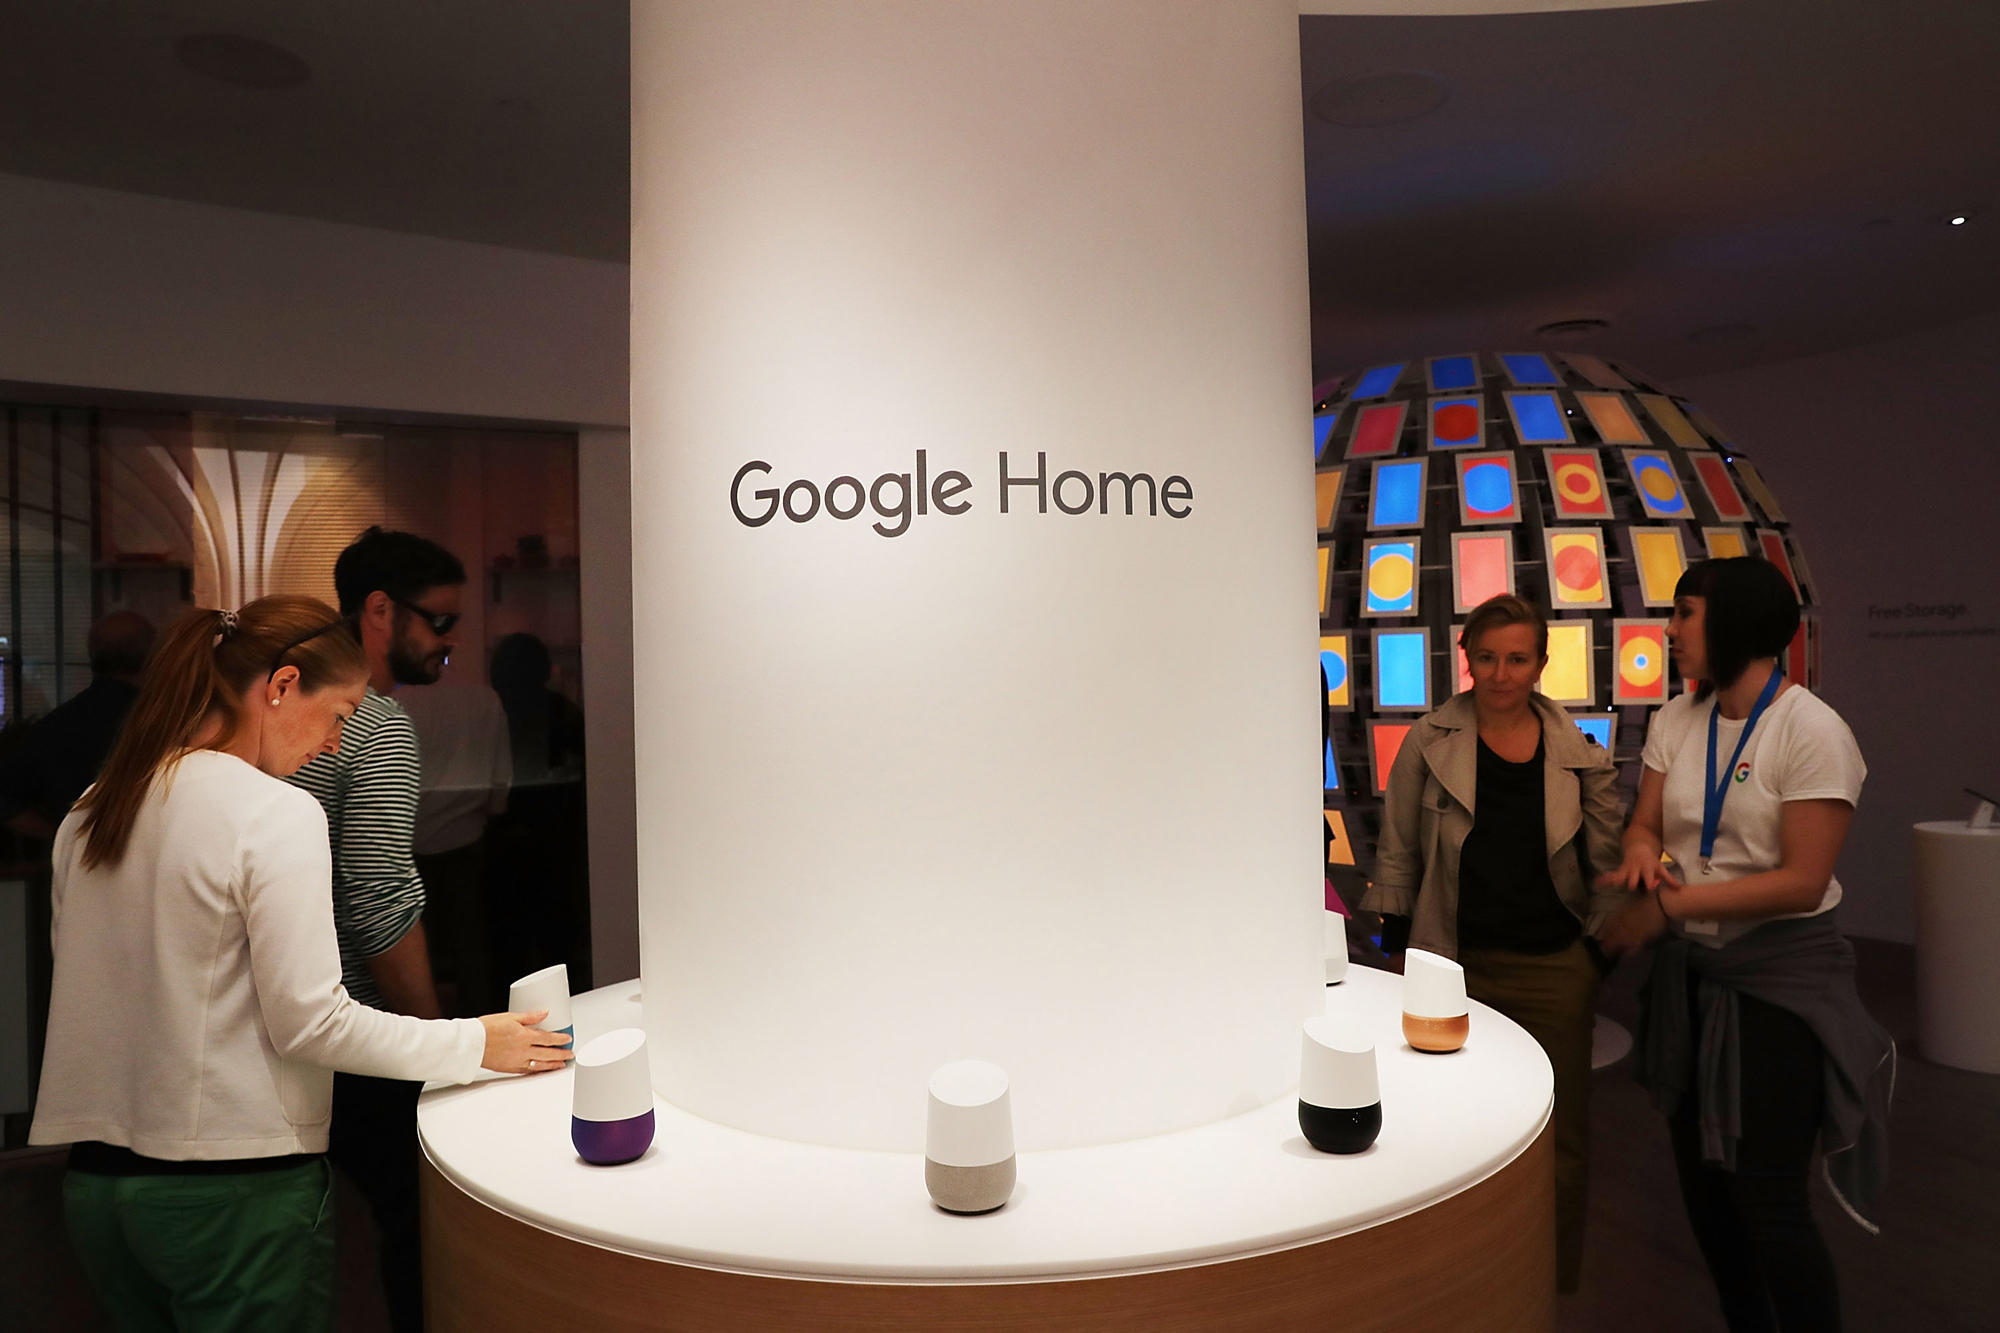 People love smart assistants, like the one built into Google's Home speaker. But they may not be making full use of all the software they can offer.